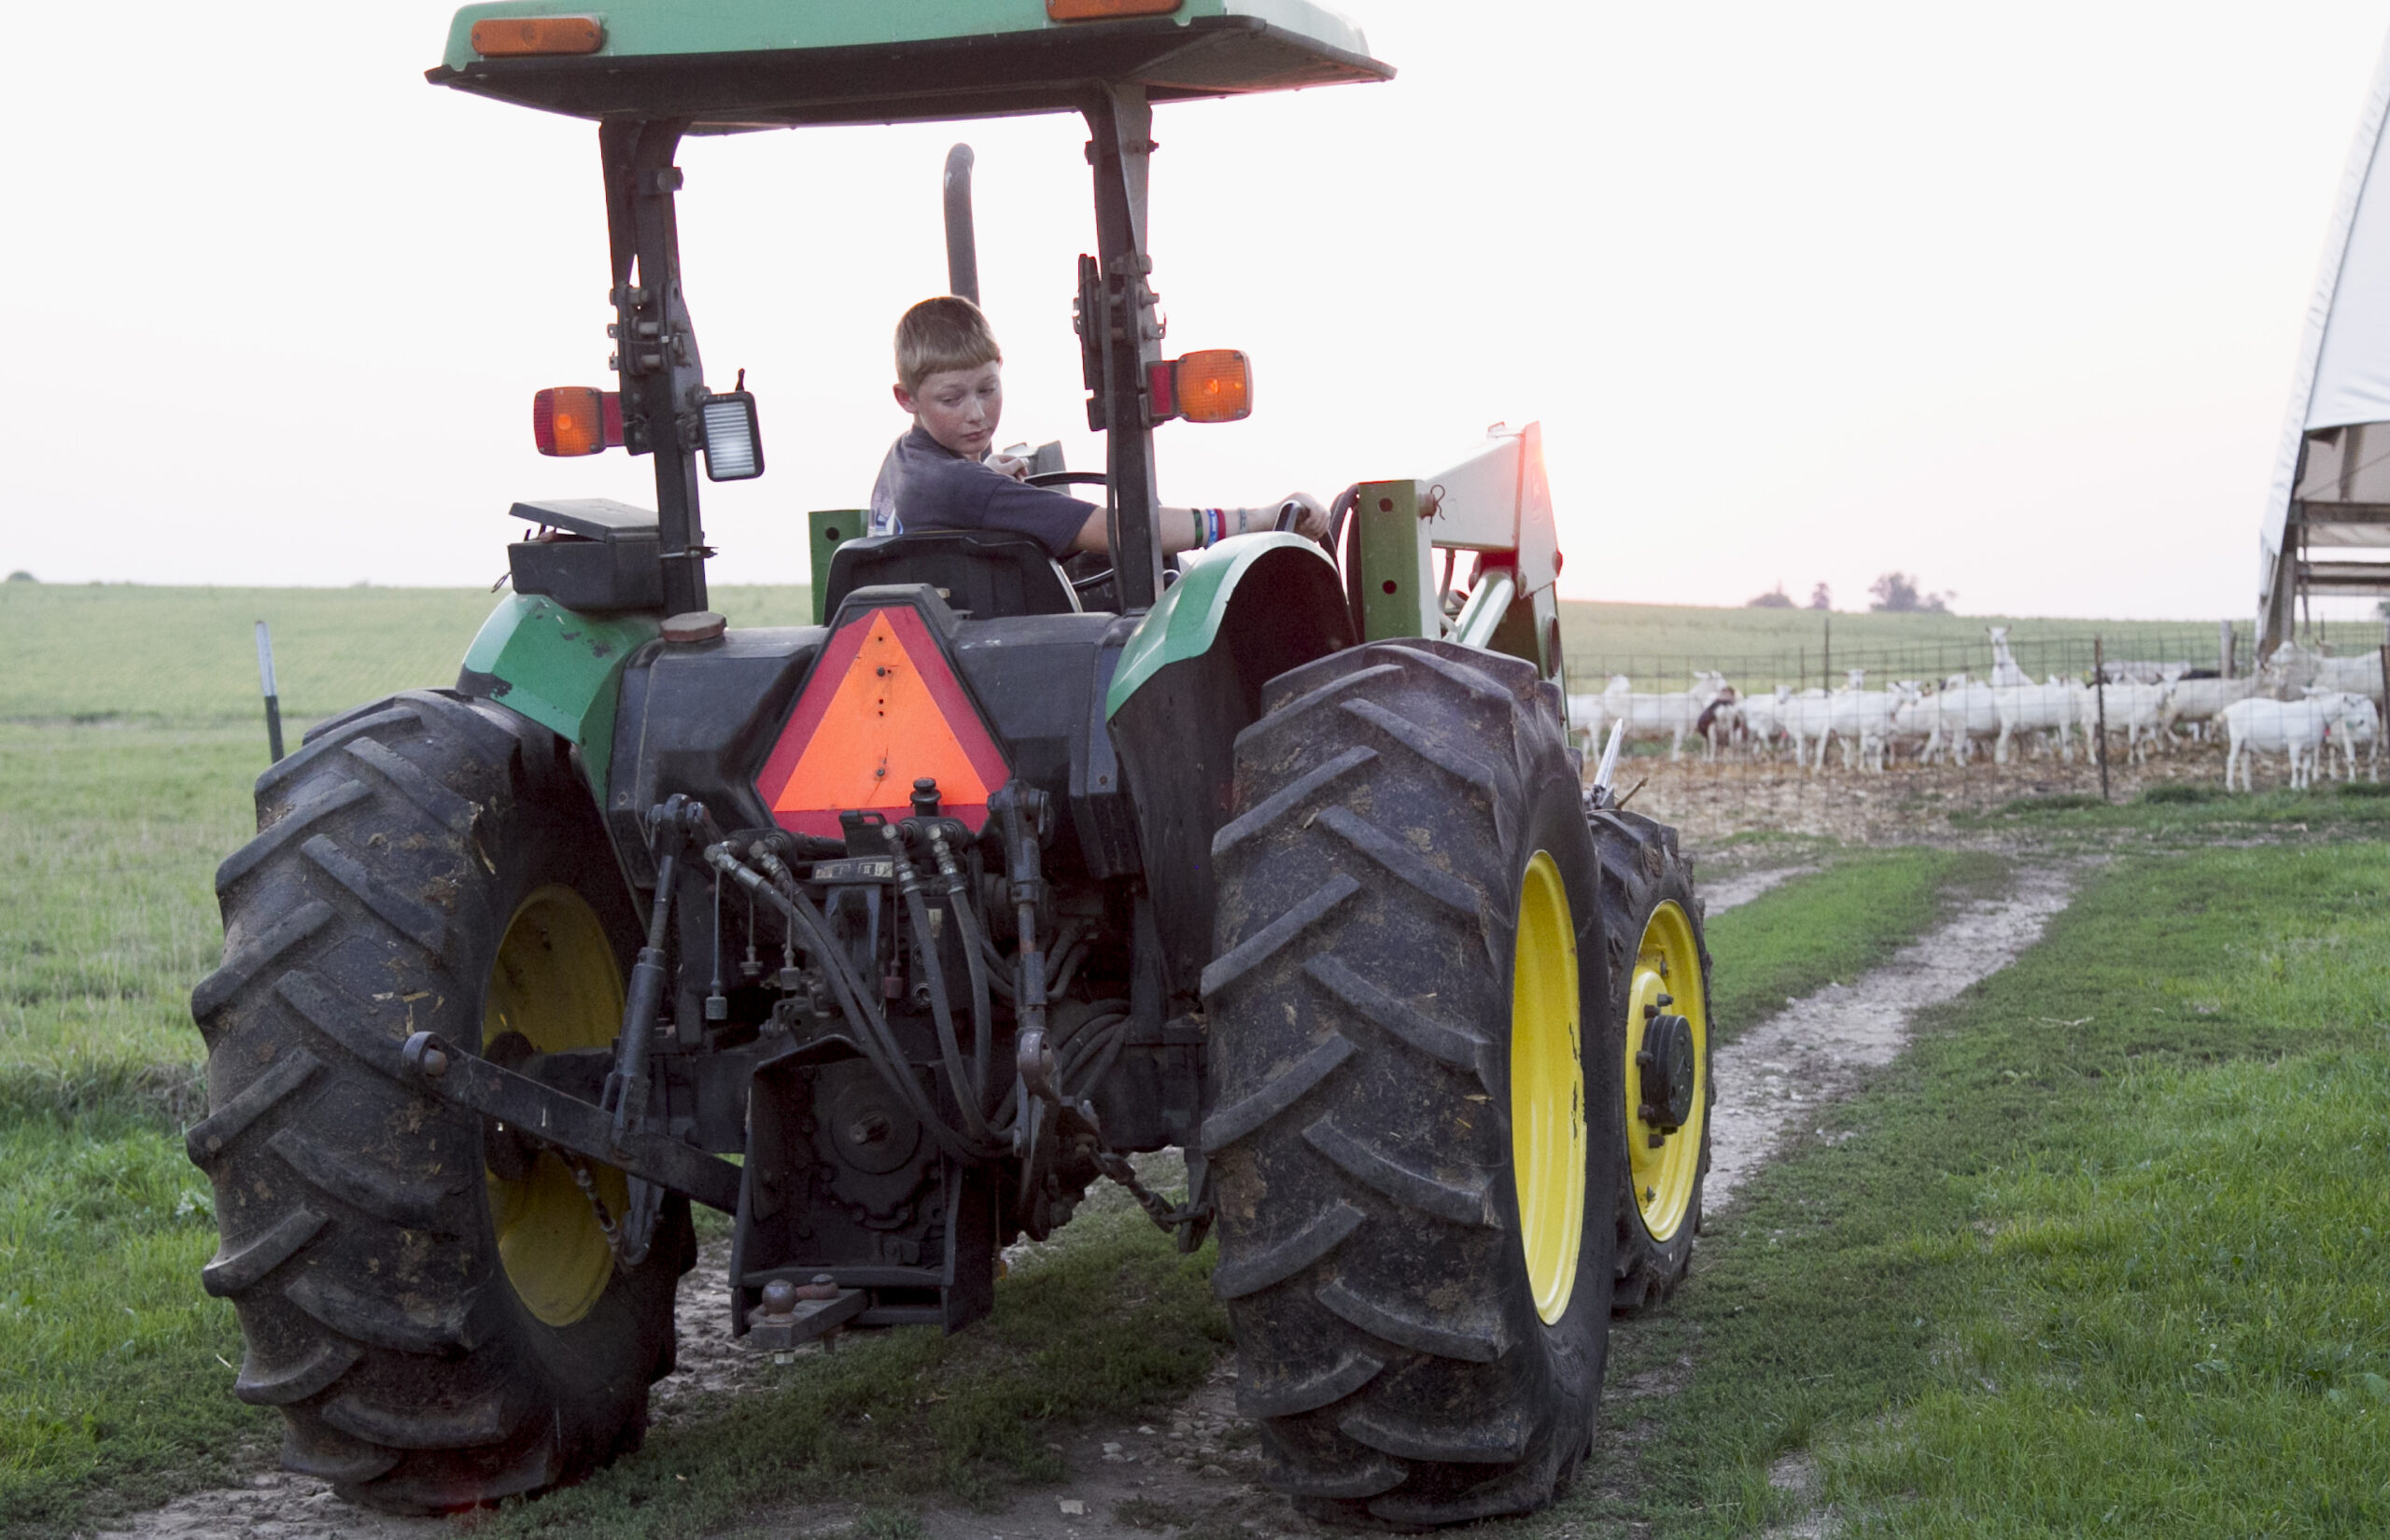 12 year-old Mark Gregoricka backs up his family's tractor